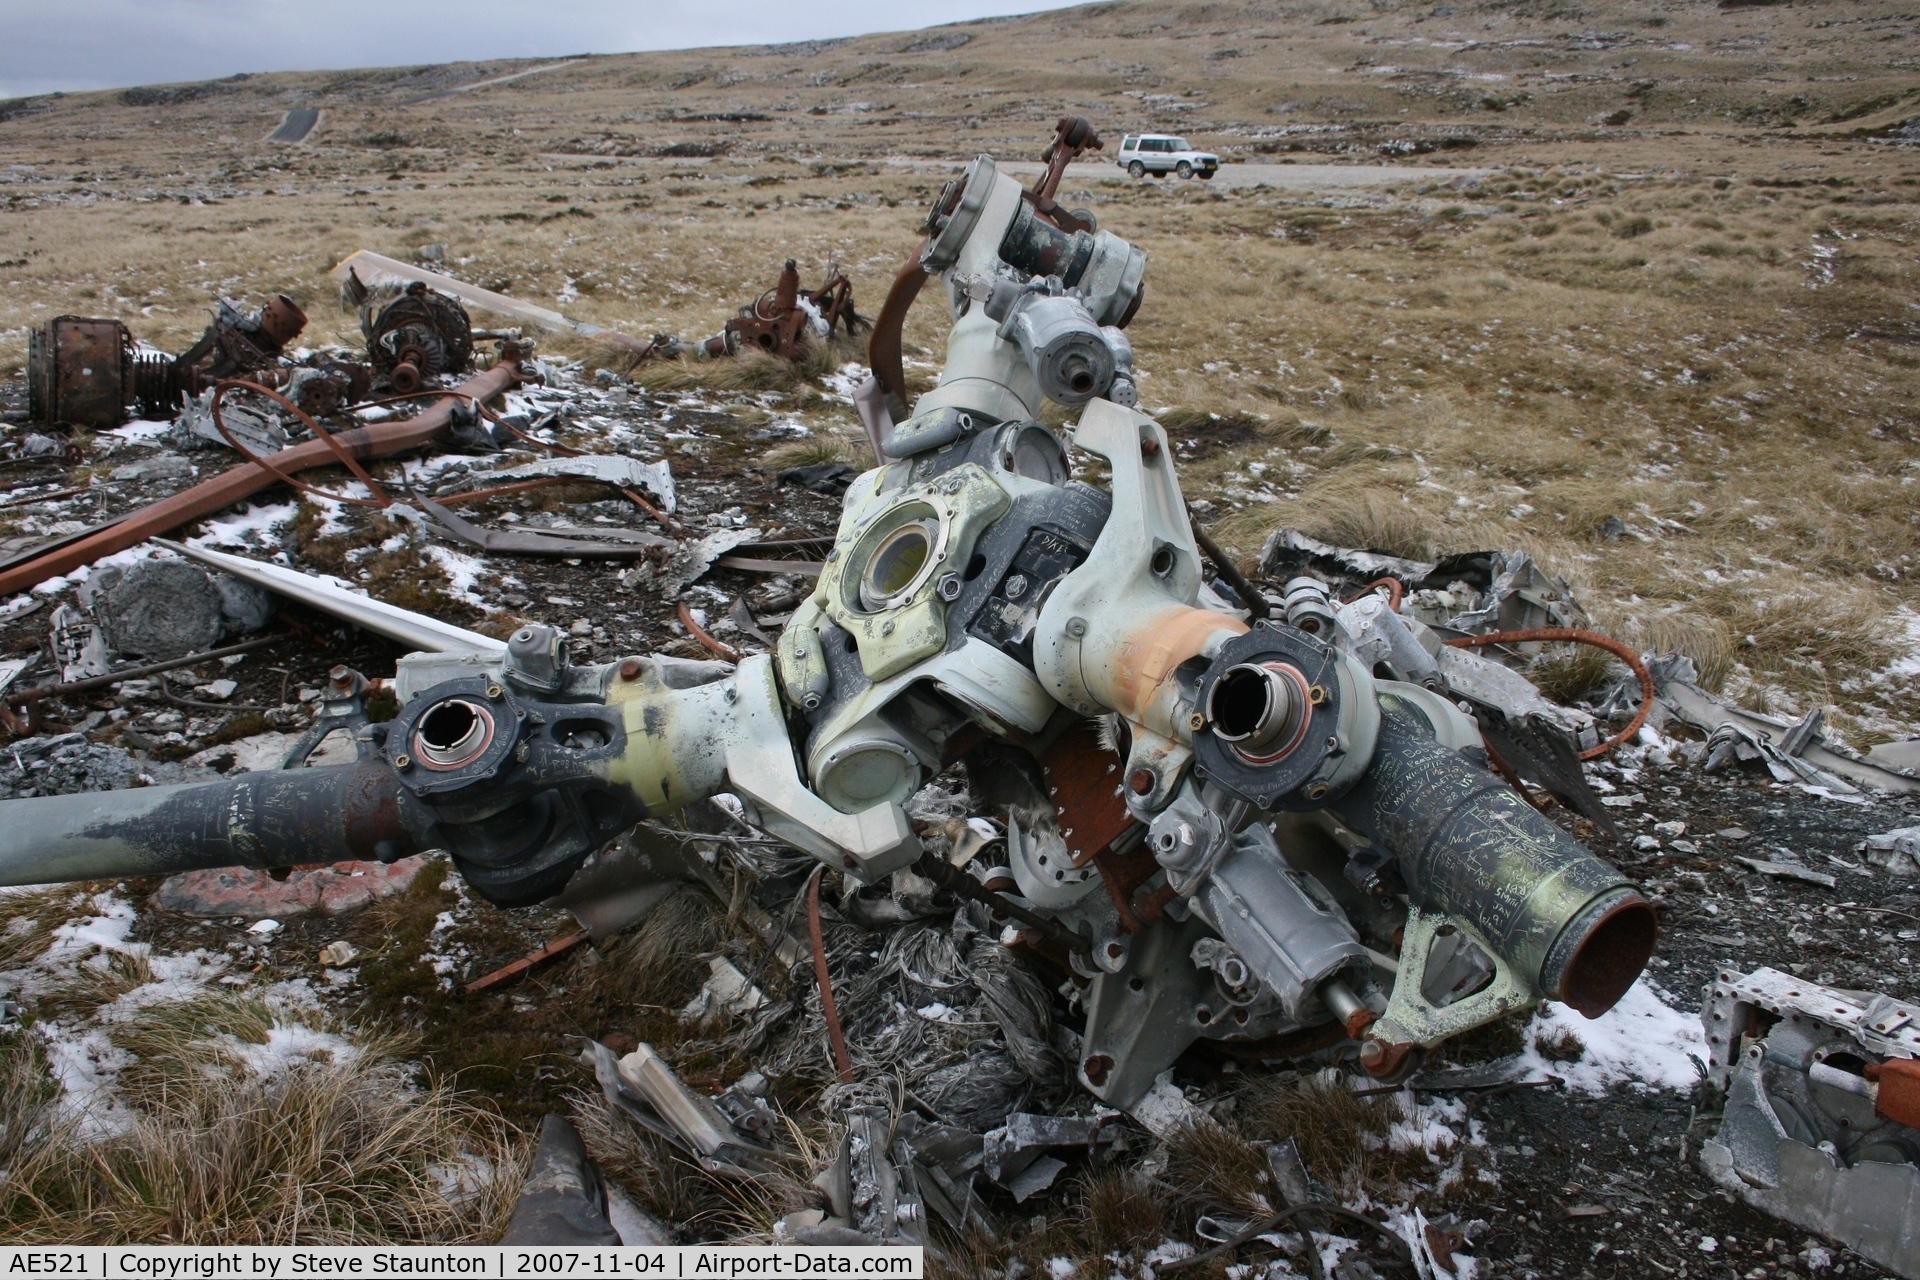 AE521, Boeing Vertol CH-47C Chinook C/N B-789/CG-102, Wrecked BV Chinook CH-47C of the Argentine AF located at the foot of Mount Kent, Falkland Island. This aircraft was destroyed during the 1982 Falklands Conflict.